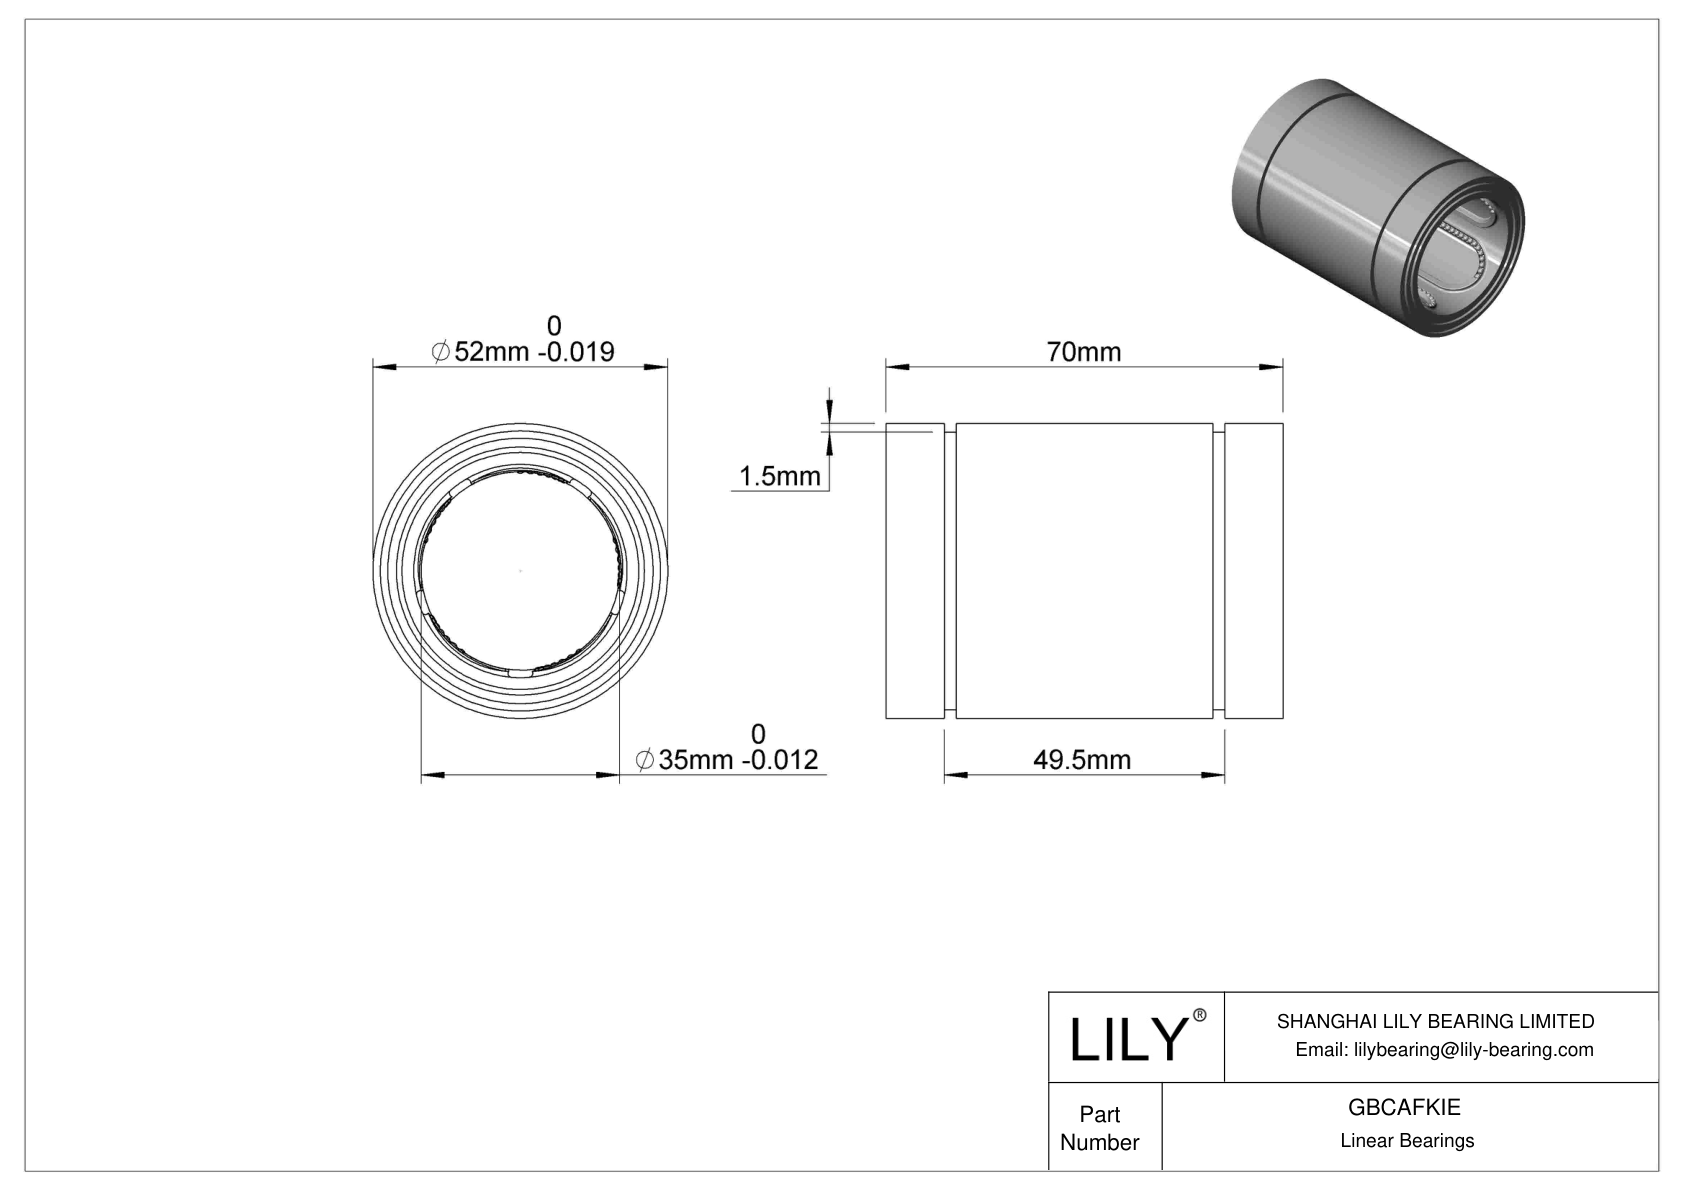 GBCAFKIE Common Linear Ball Bearings cad drawing